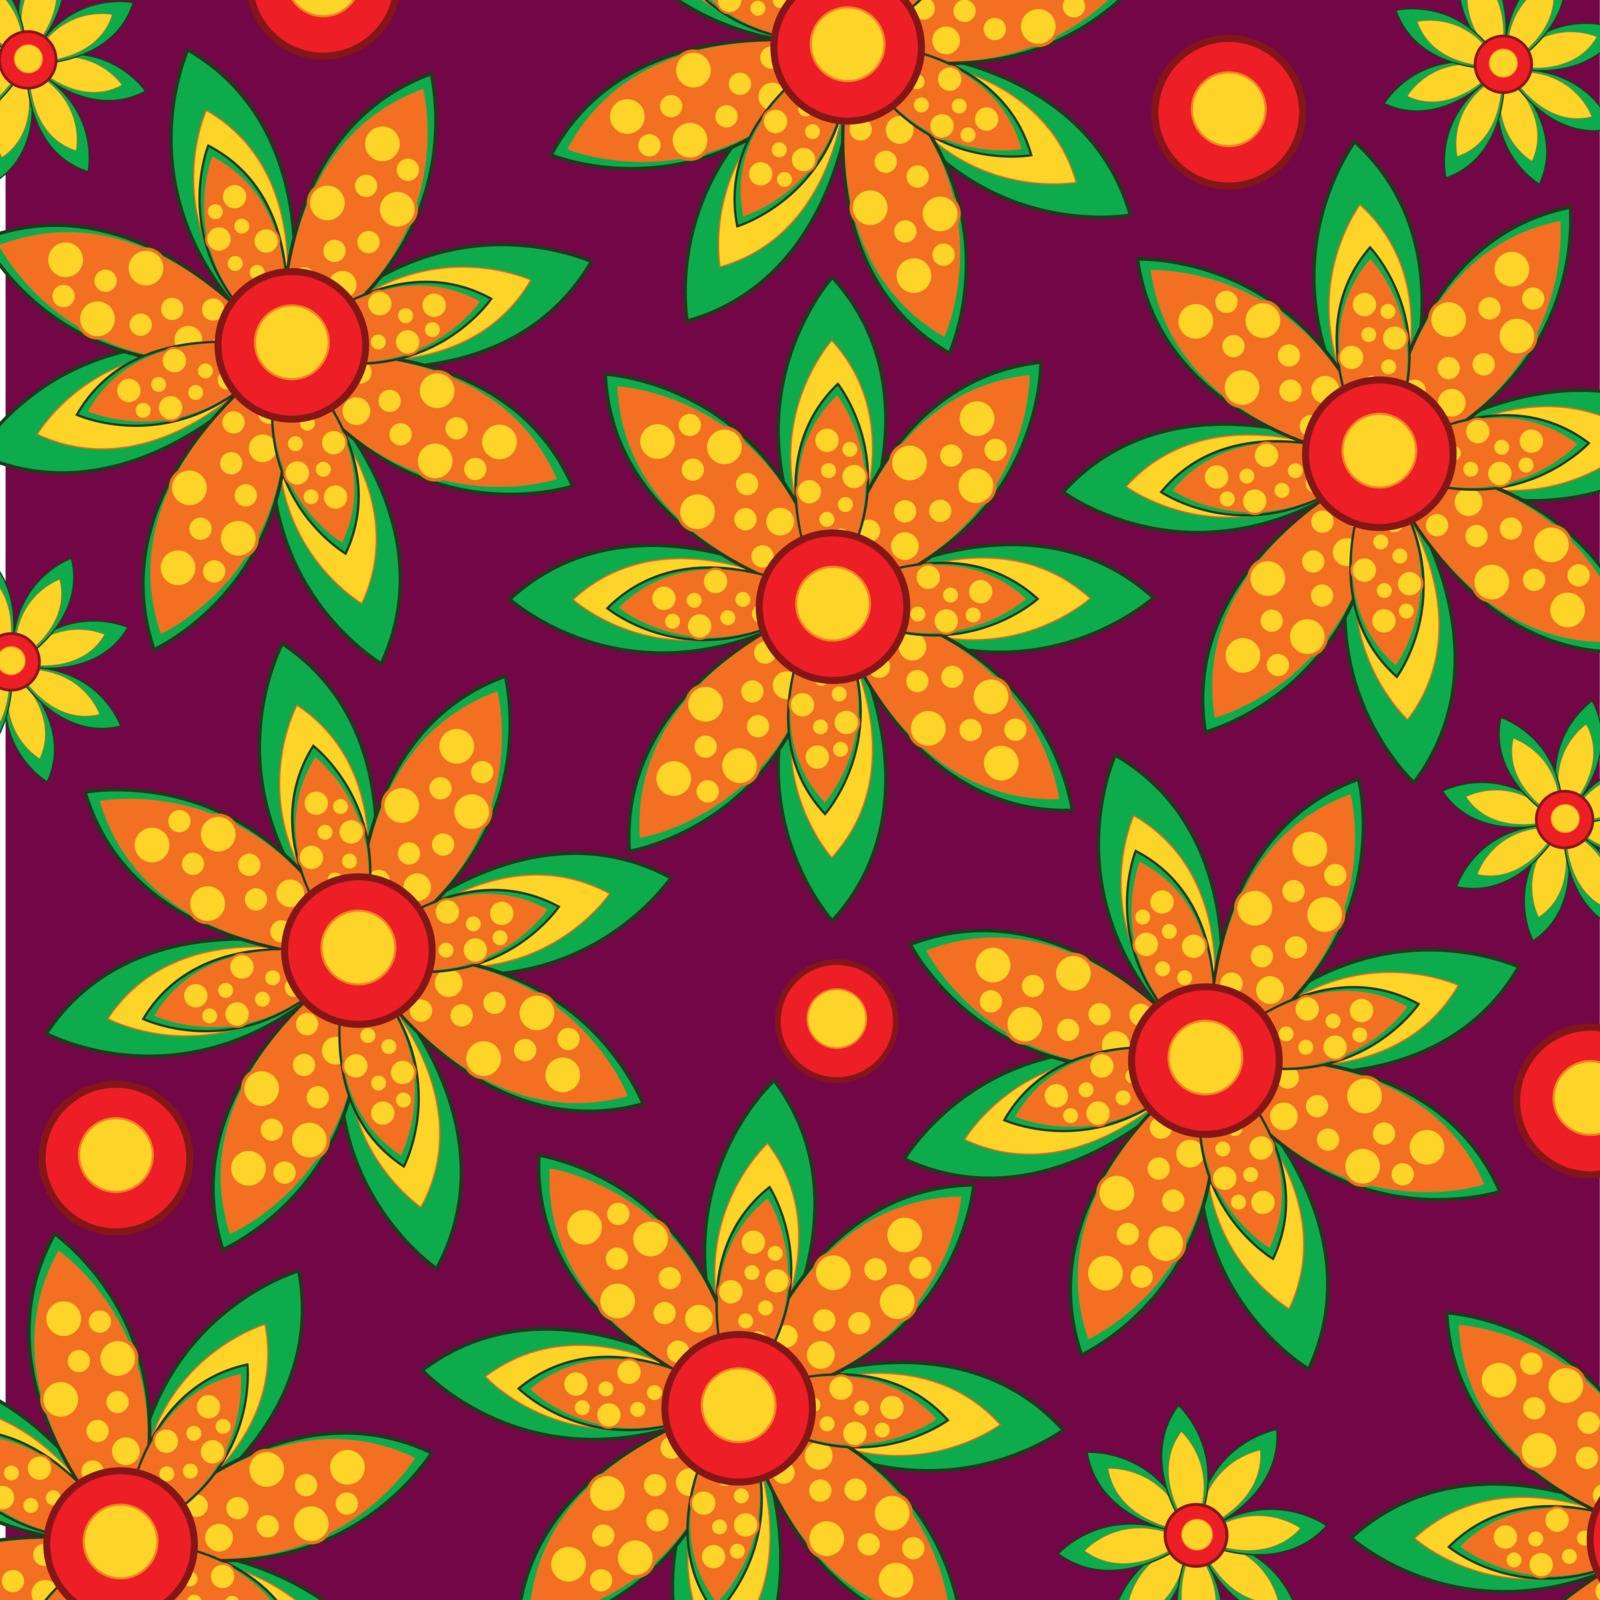 Bright and colorful pattern from figures on rose background